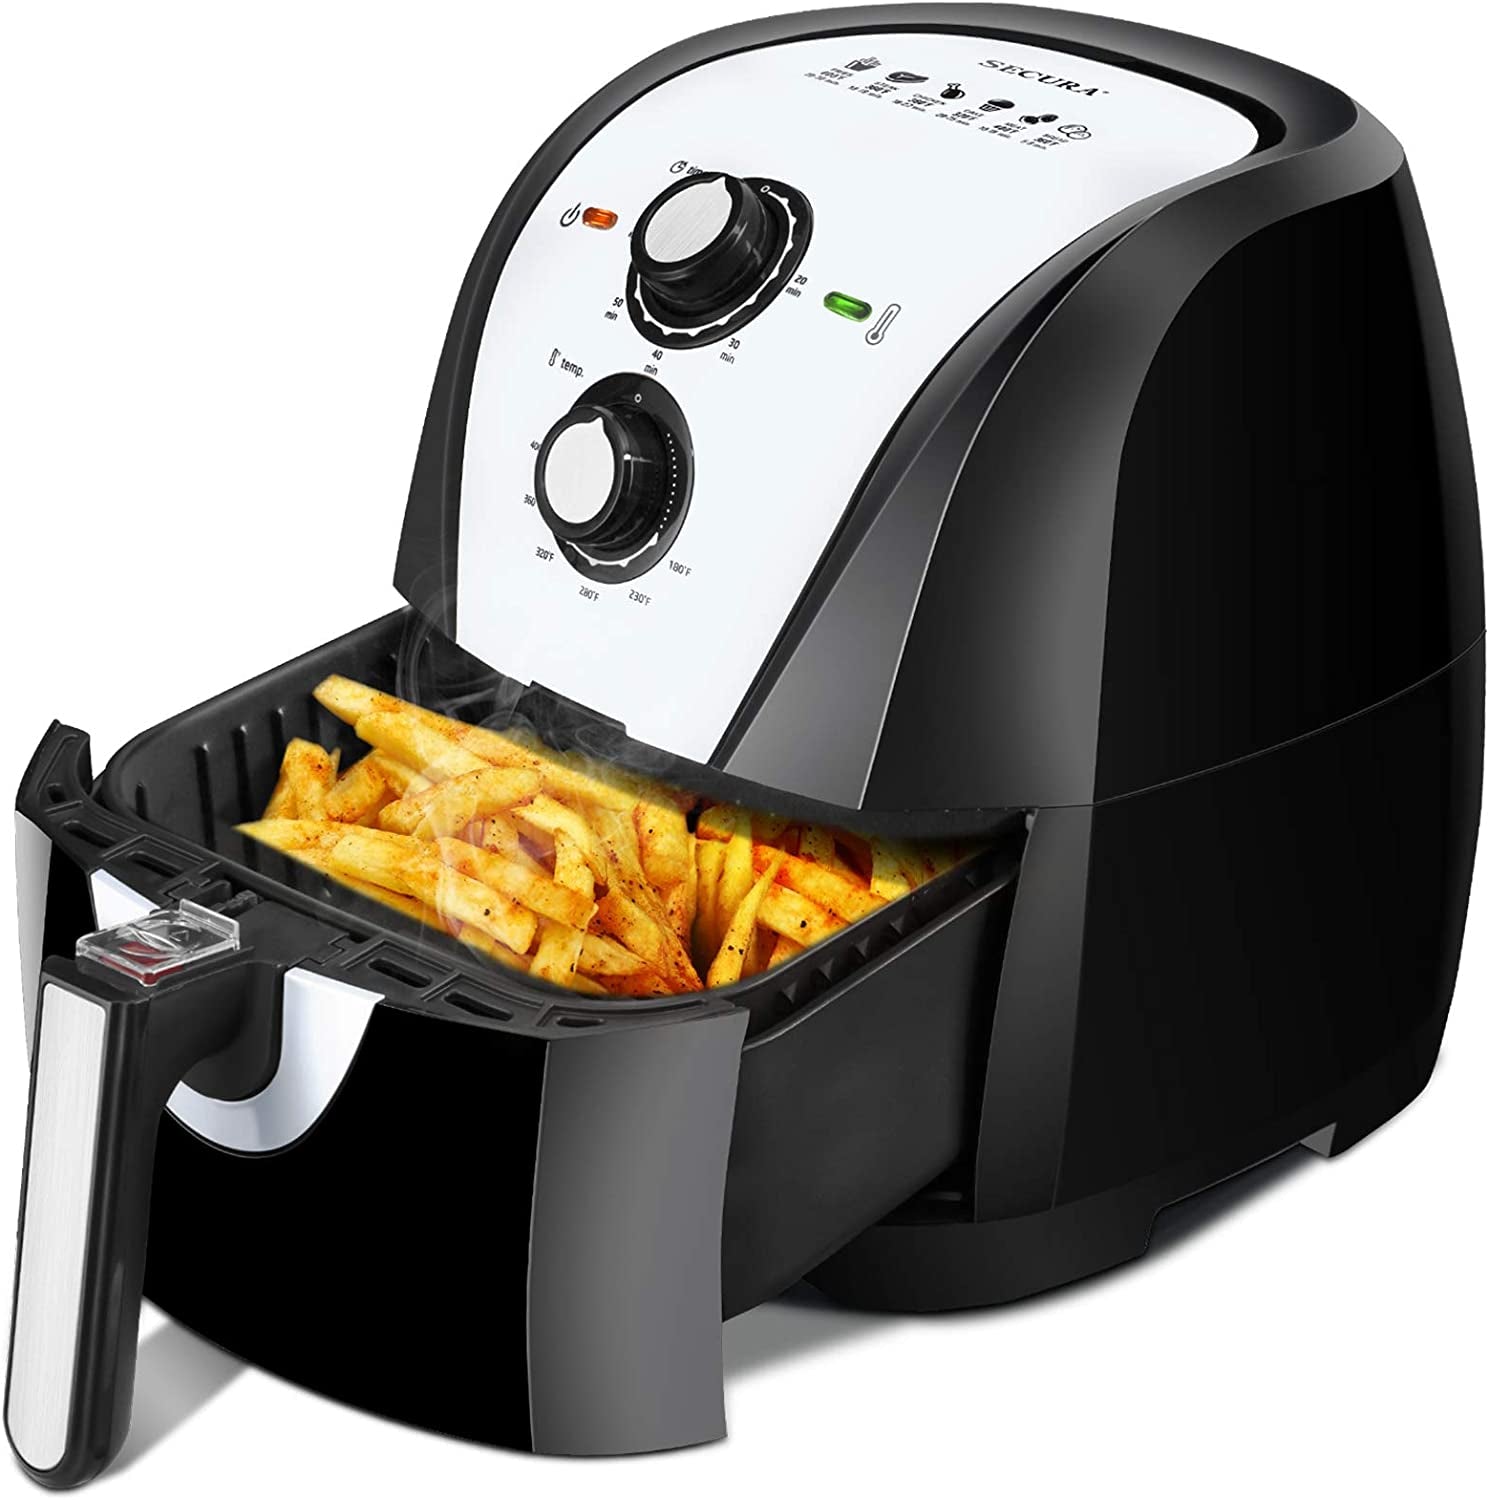 Secura Air Fryer XL 5.3 Quart 1700-Watt Electric Hot Air Fryers Oven Oil Free Nonstick Cooker W/Additional Accessories, Recipes, BBQ Rack & Skewers for Frying, Roasting, Grilling, Baking (Gray)